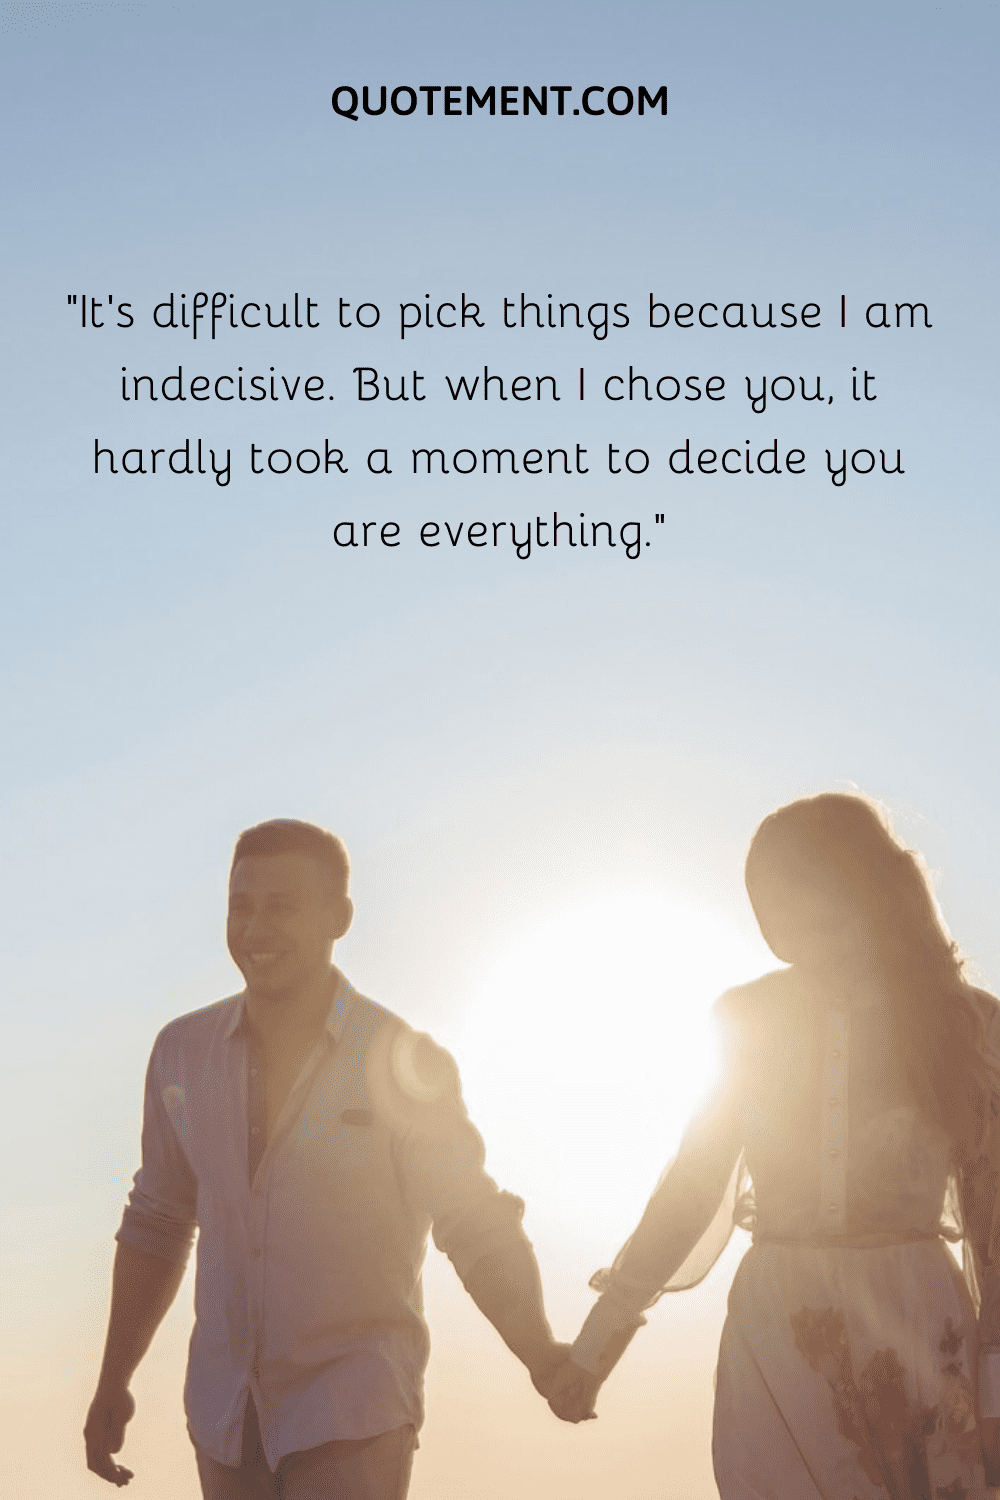 “It’s difficult to pick things because I am indecisive. But when I chose you, it hardly took a moment to decide you are everything.”